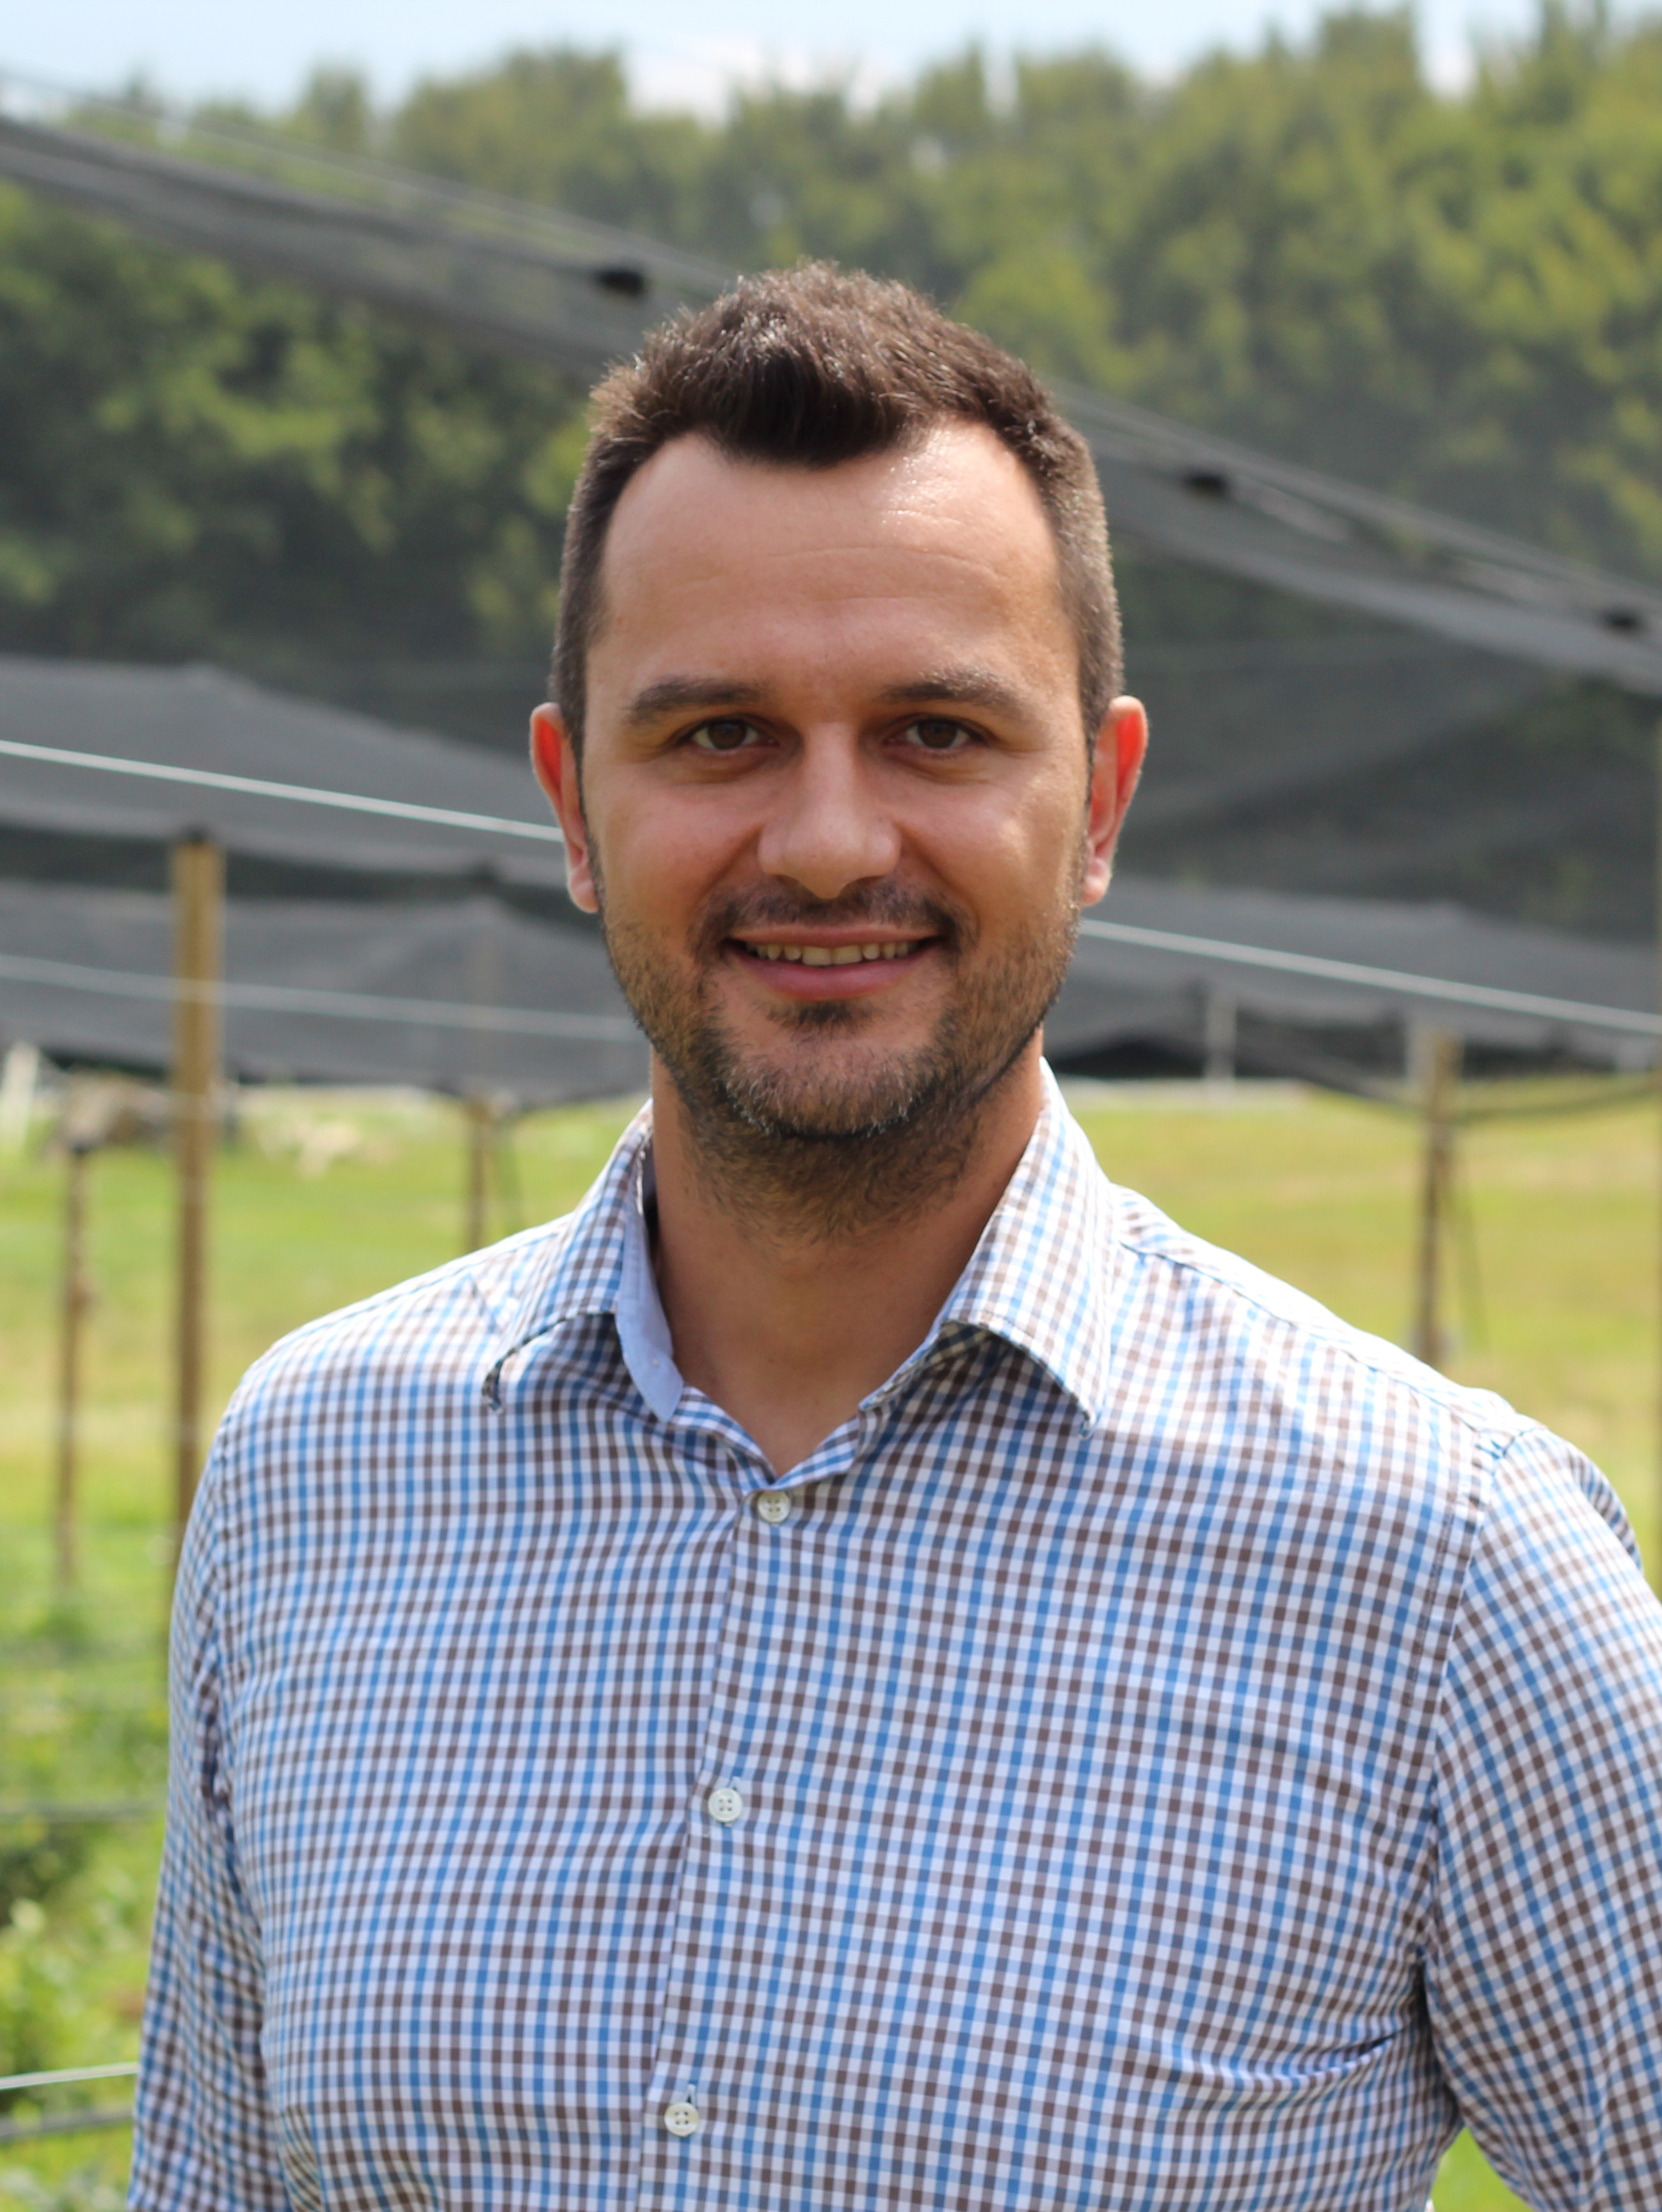 Matija Zulj, CEO and Founder at Agrivi.